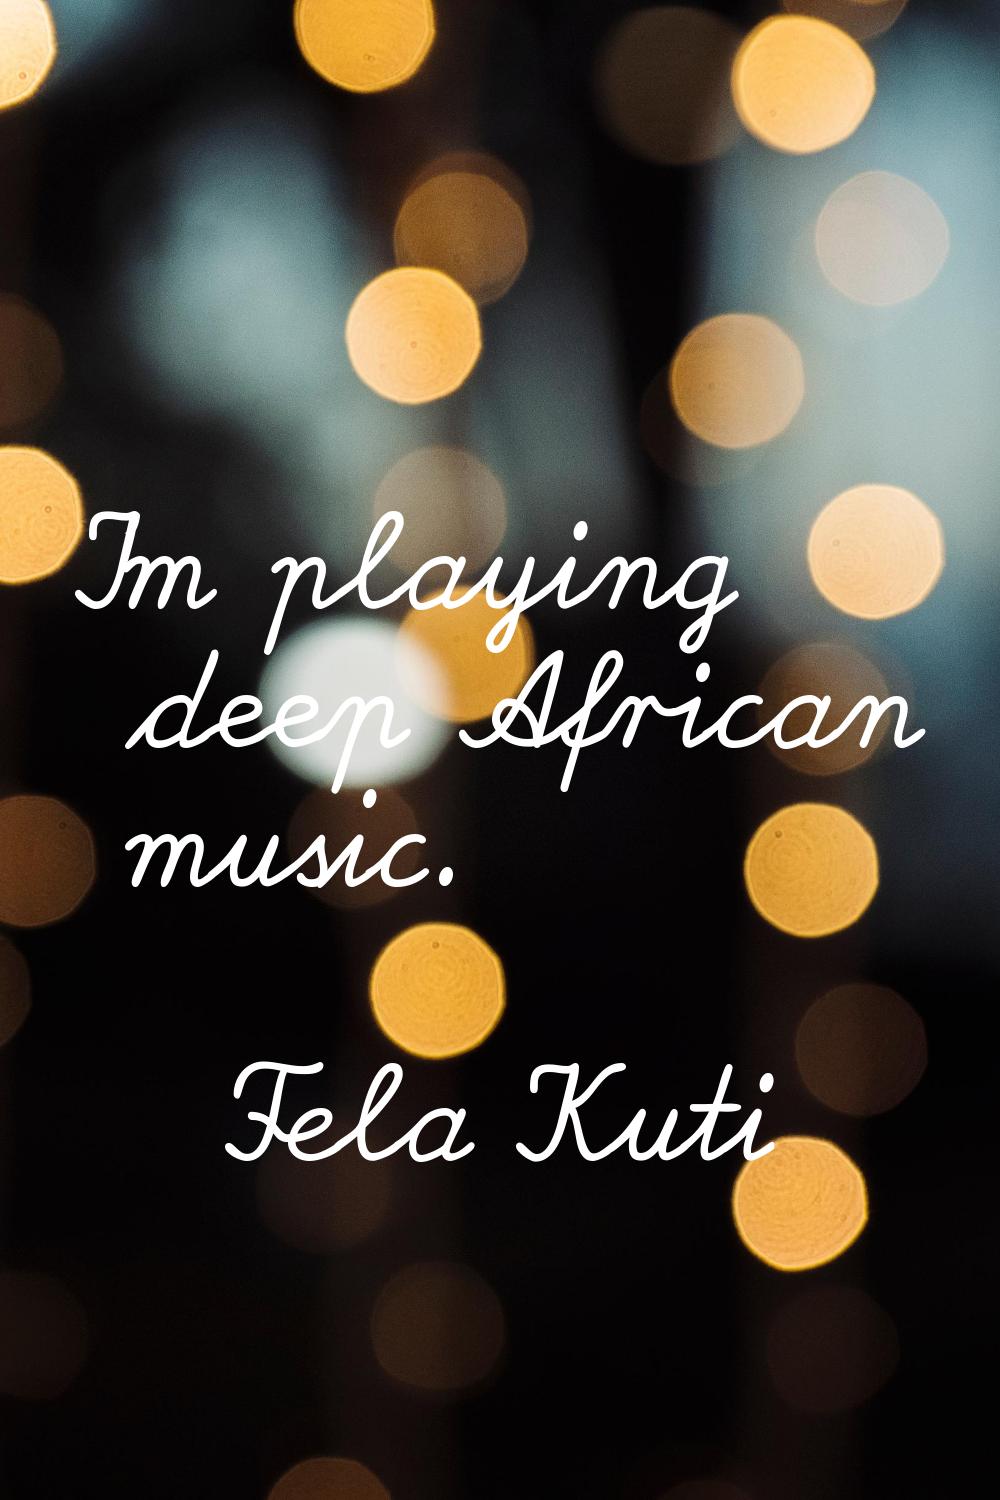 I'm playing deep African music.